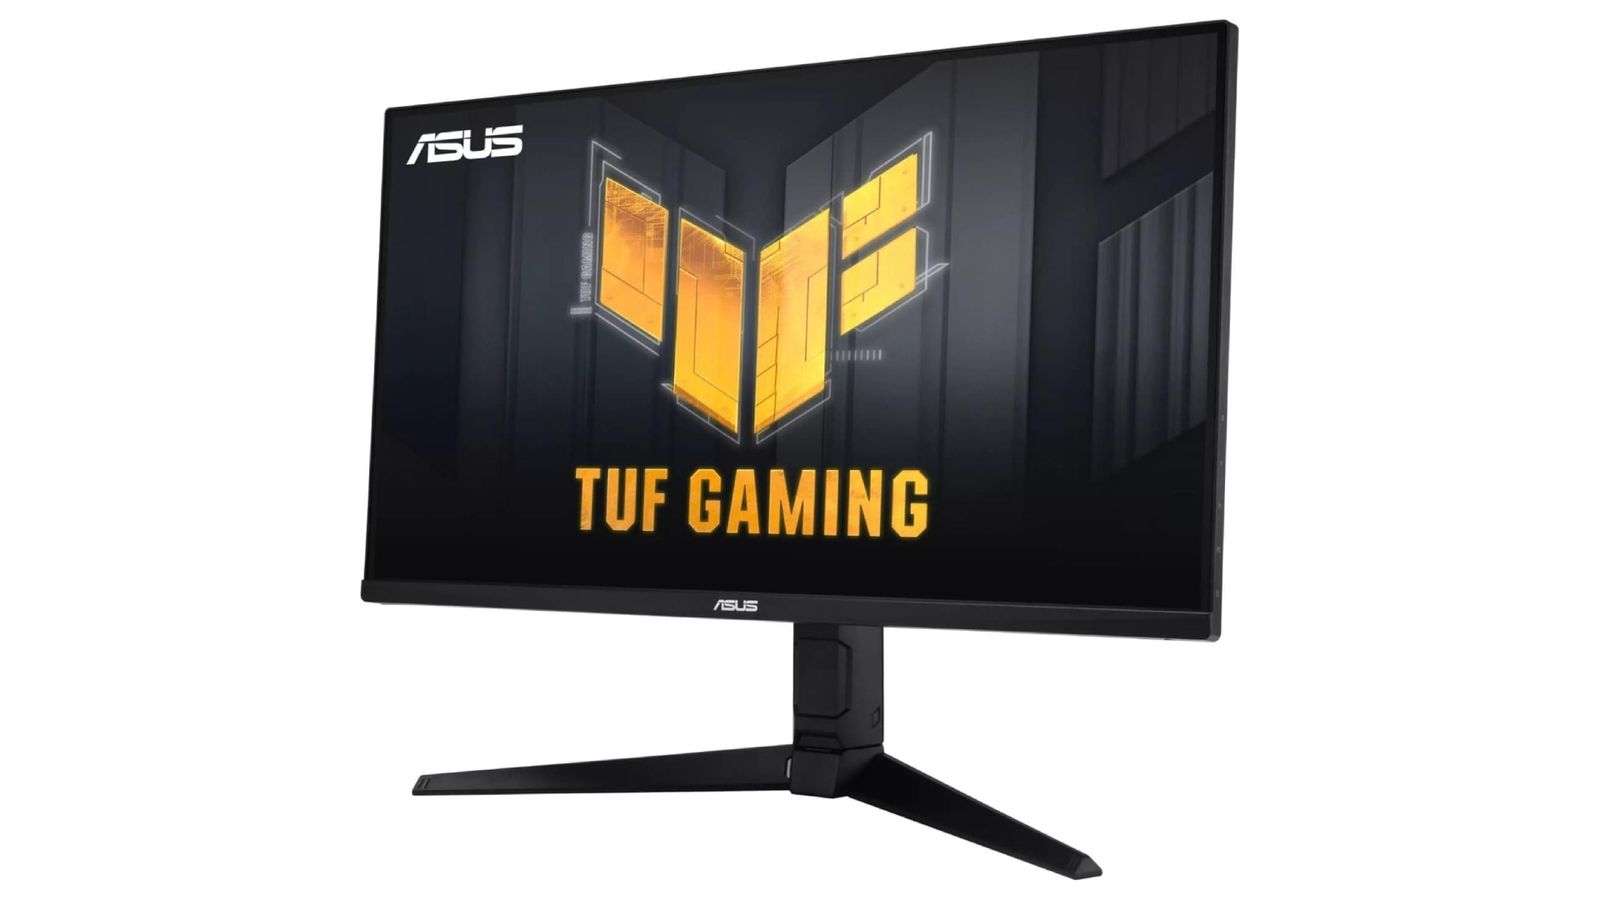 ASUS TUF Gaming VG28UQL1A product image of a black monitor featuring yellow TUF Gaming branding on the display.